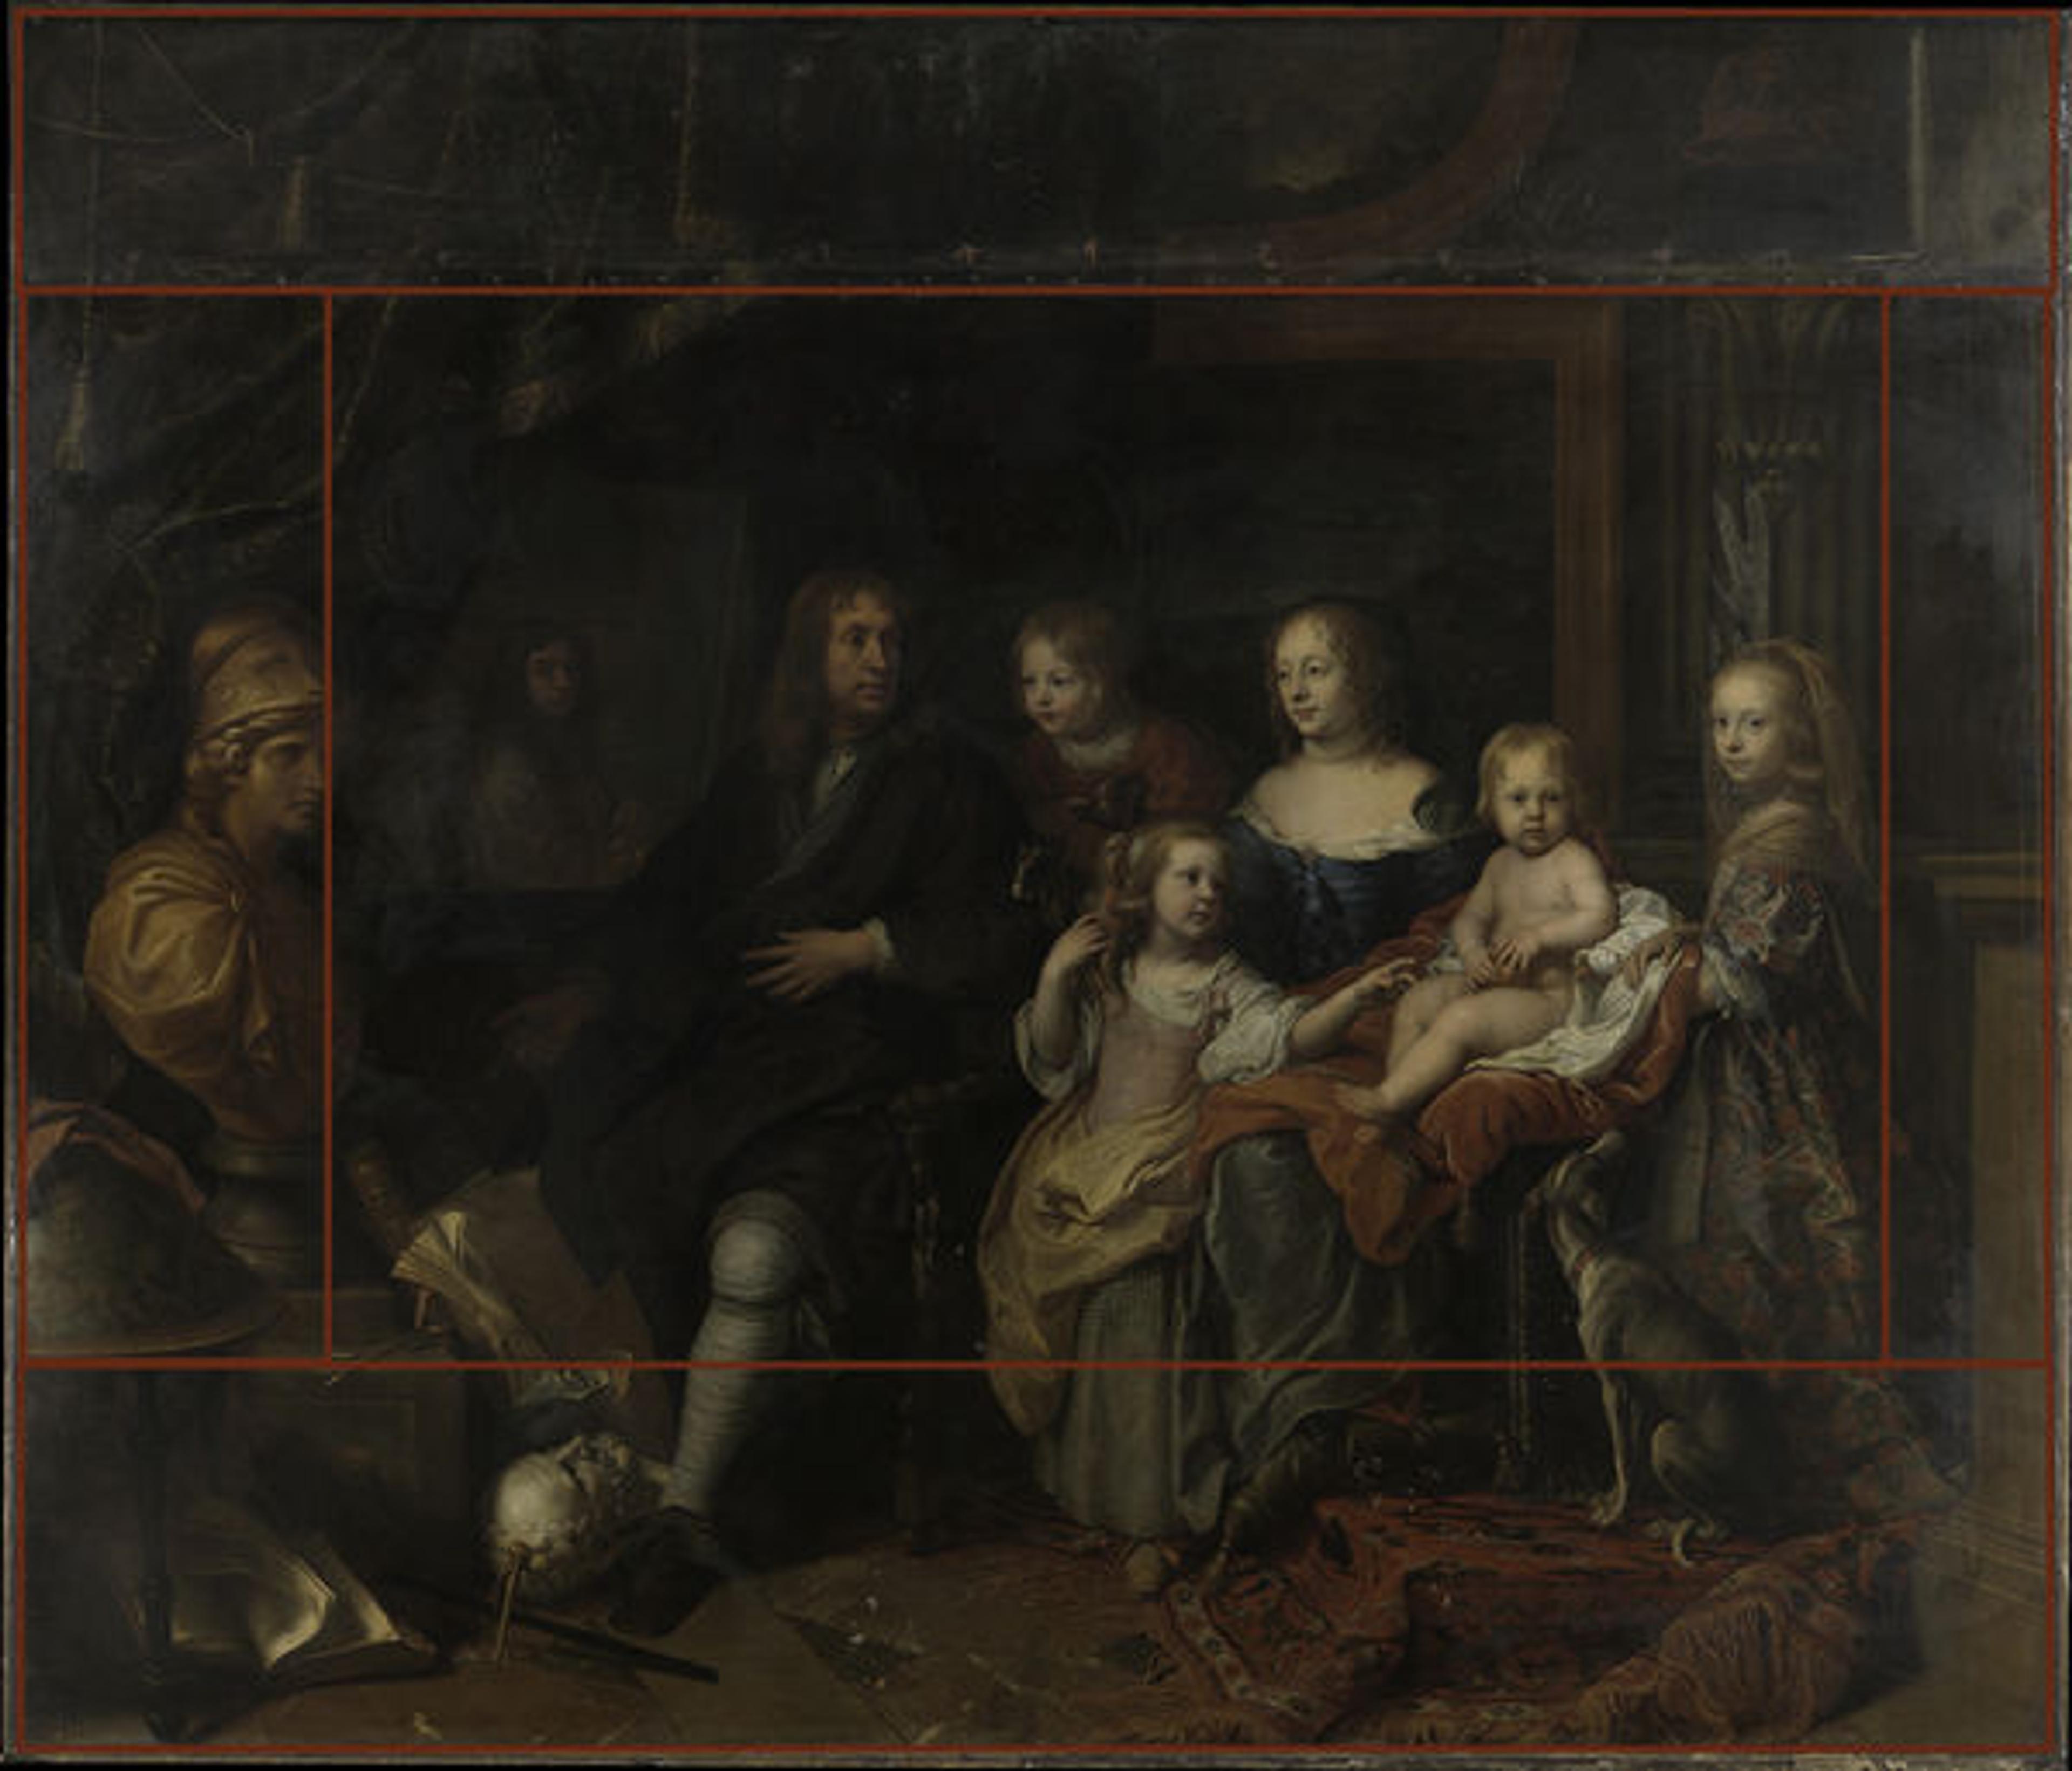 Charles Le Brun (French, 1619–1690) | Everhard Jabach (1618–1695) and His Family | 2014.250; approximate location of canvas seams